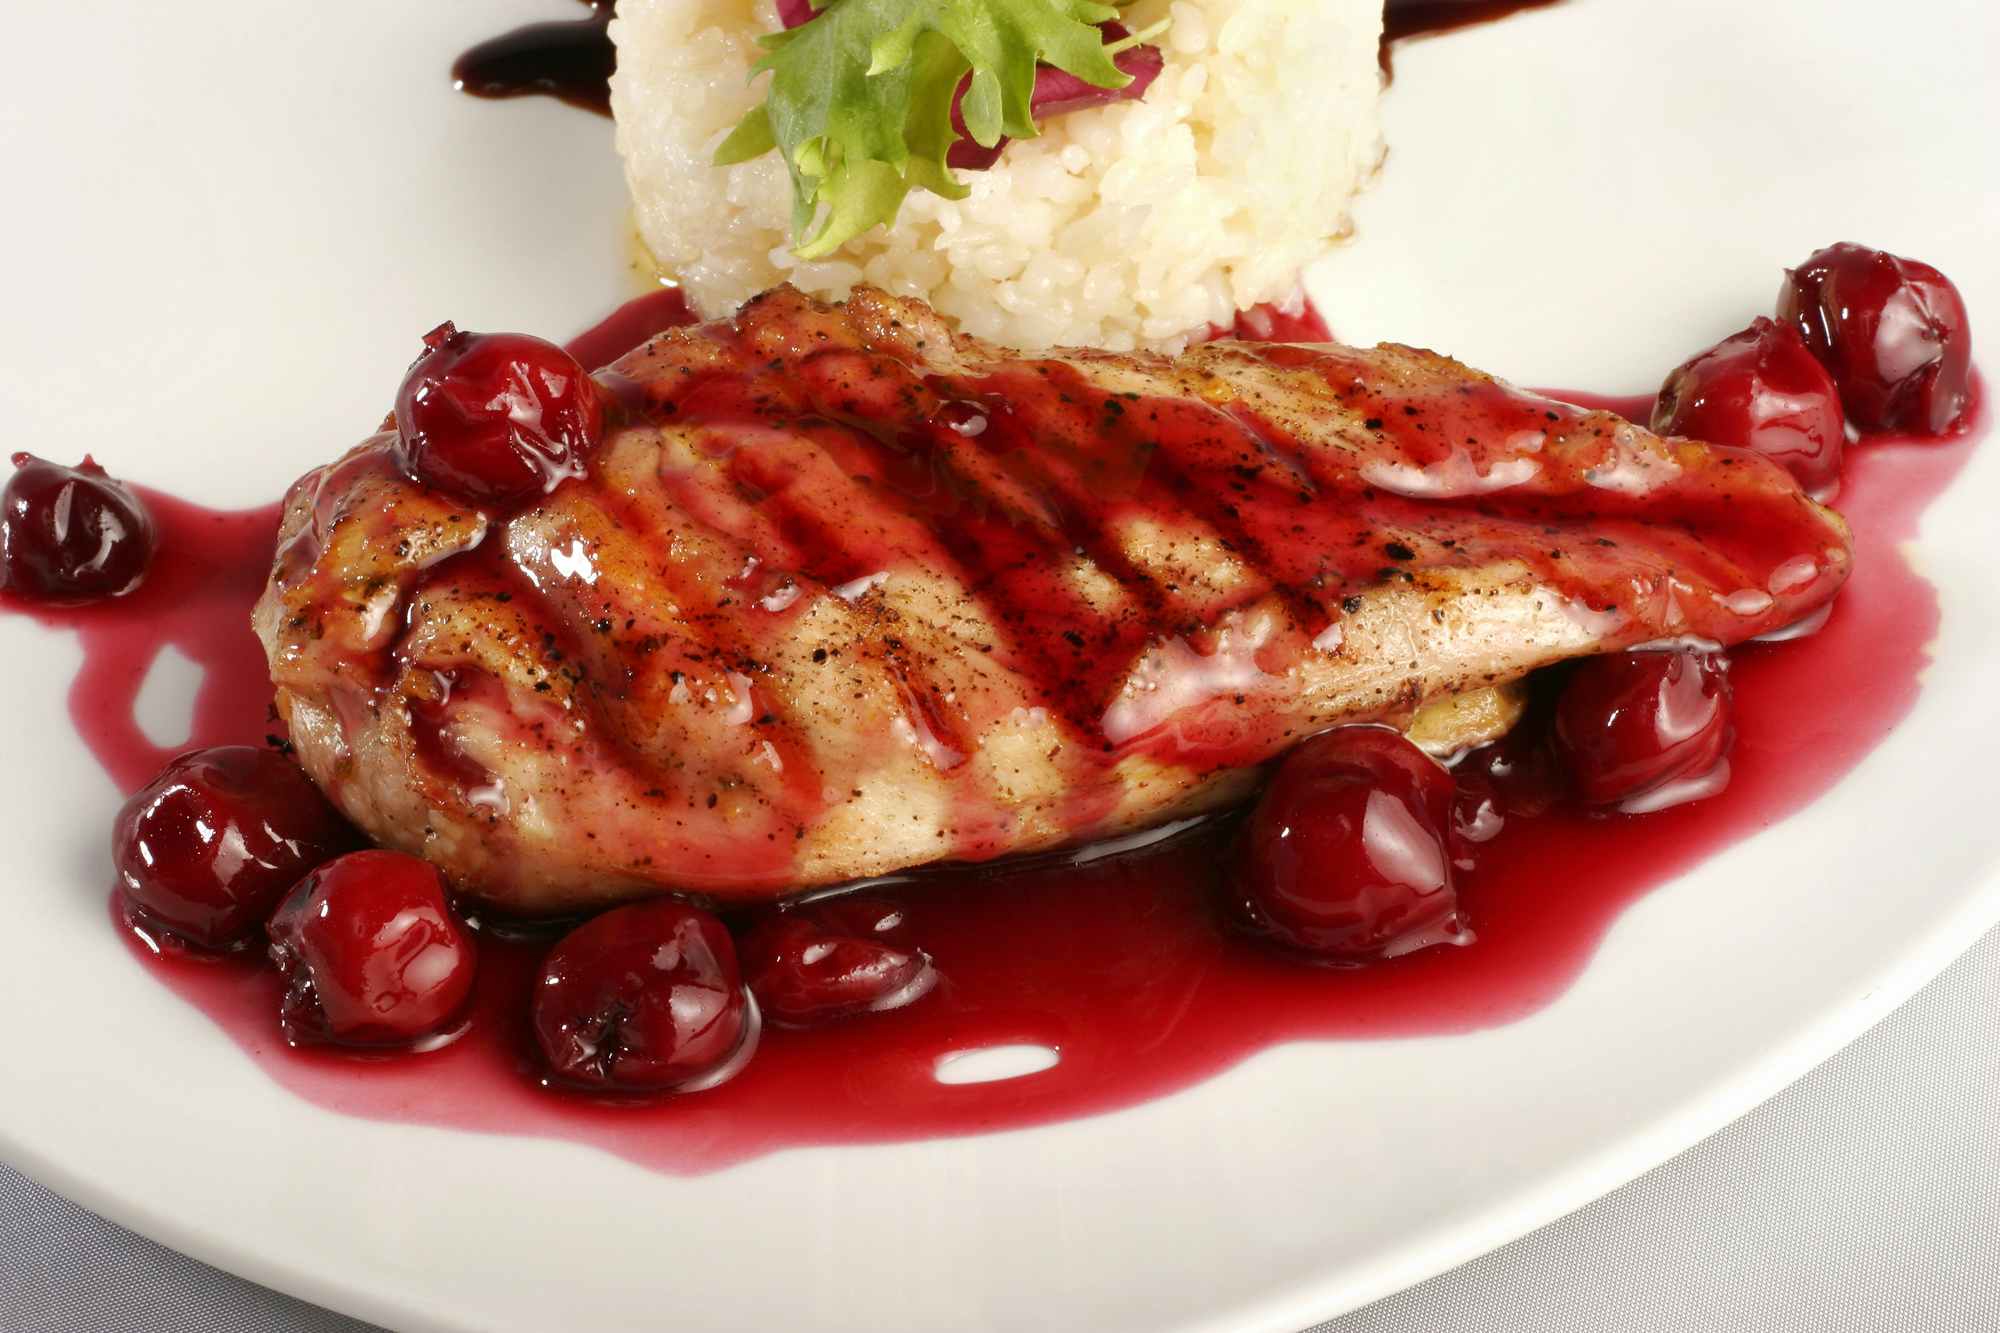 A plate of grilled chicken with cherry sauce